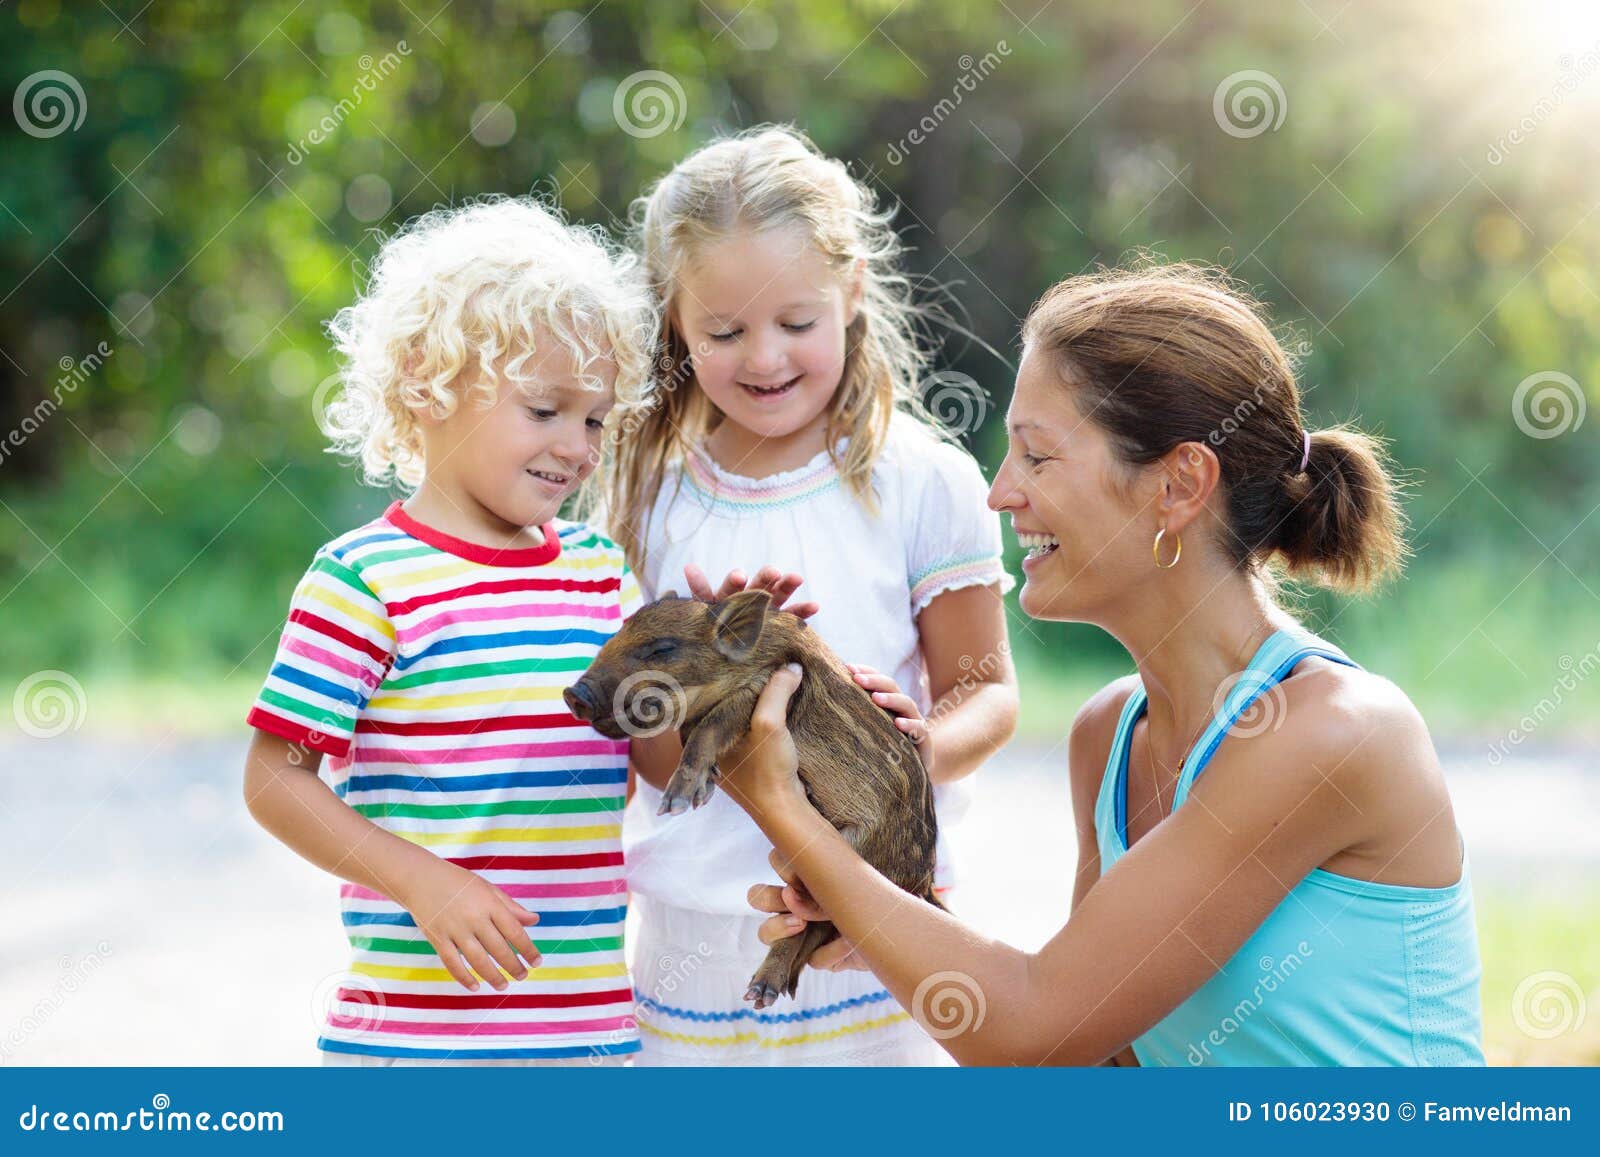 kids with baby pig animal. children at farm or zoo